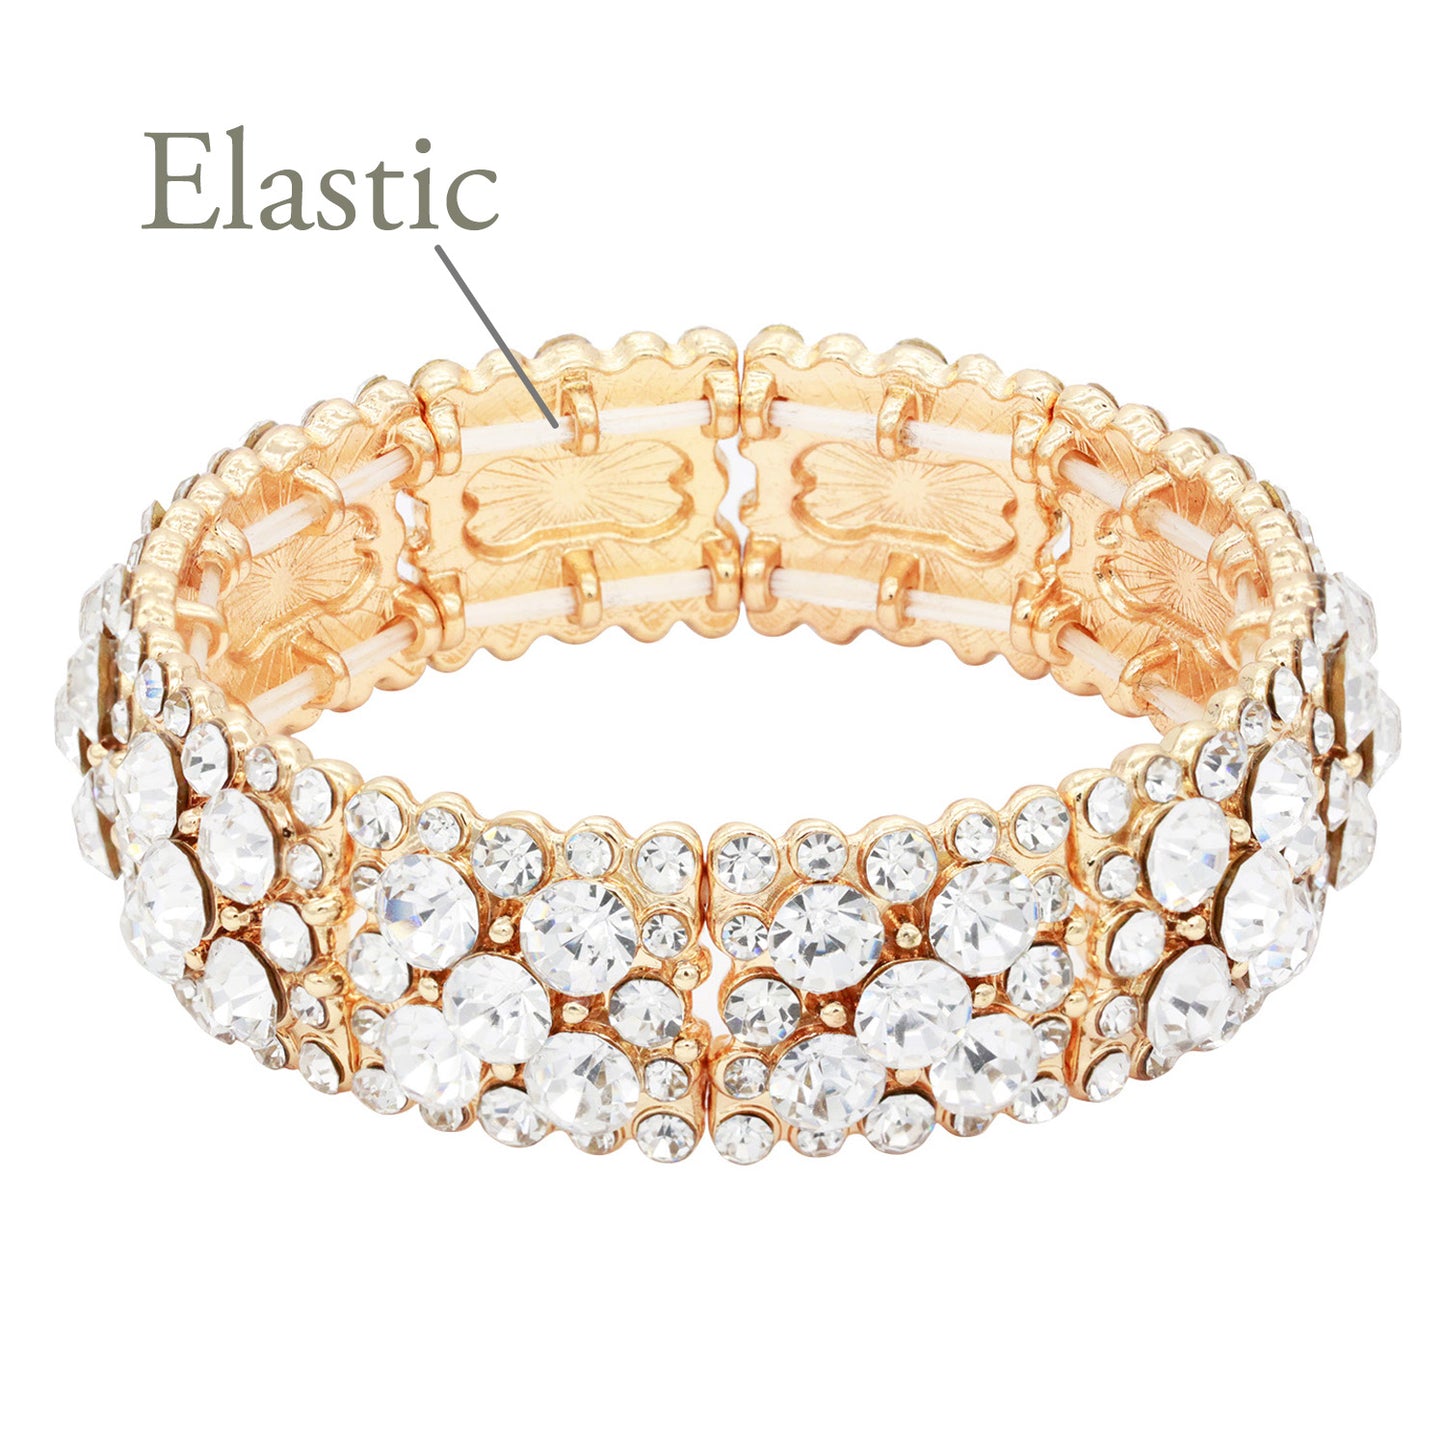 Lavencious Round Shape Rhinestones Elastic Stretch Bracelet Party Jewelry for Women 7"(Gold Clear)